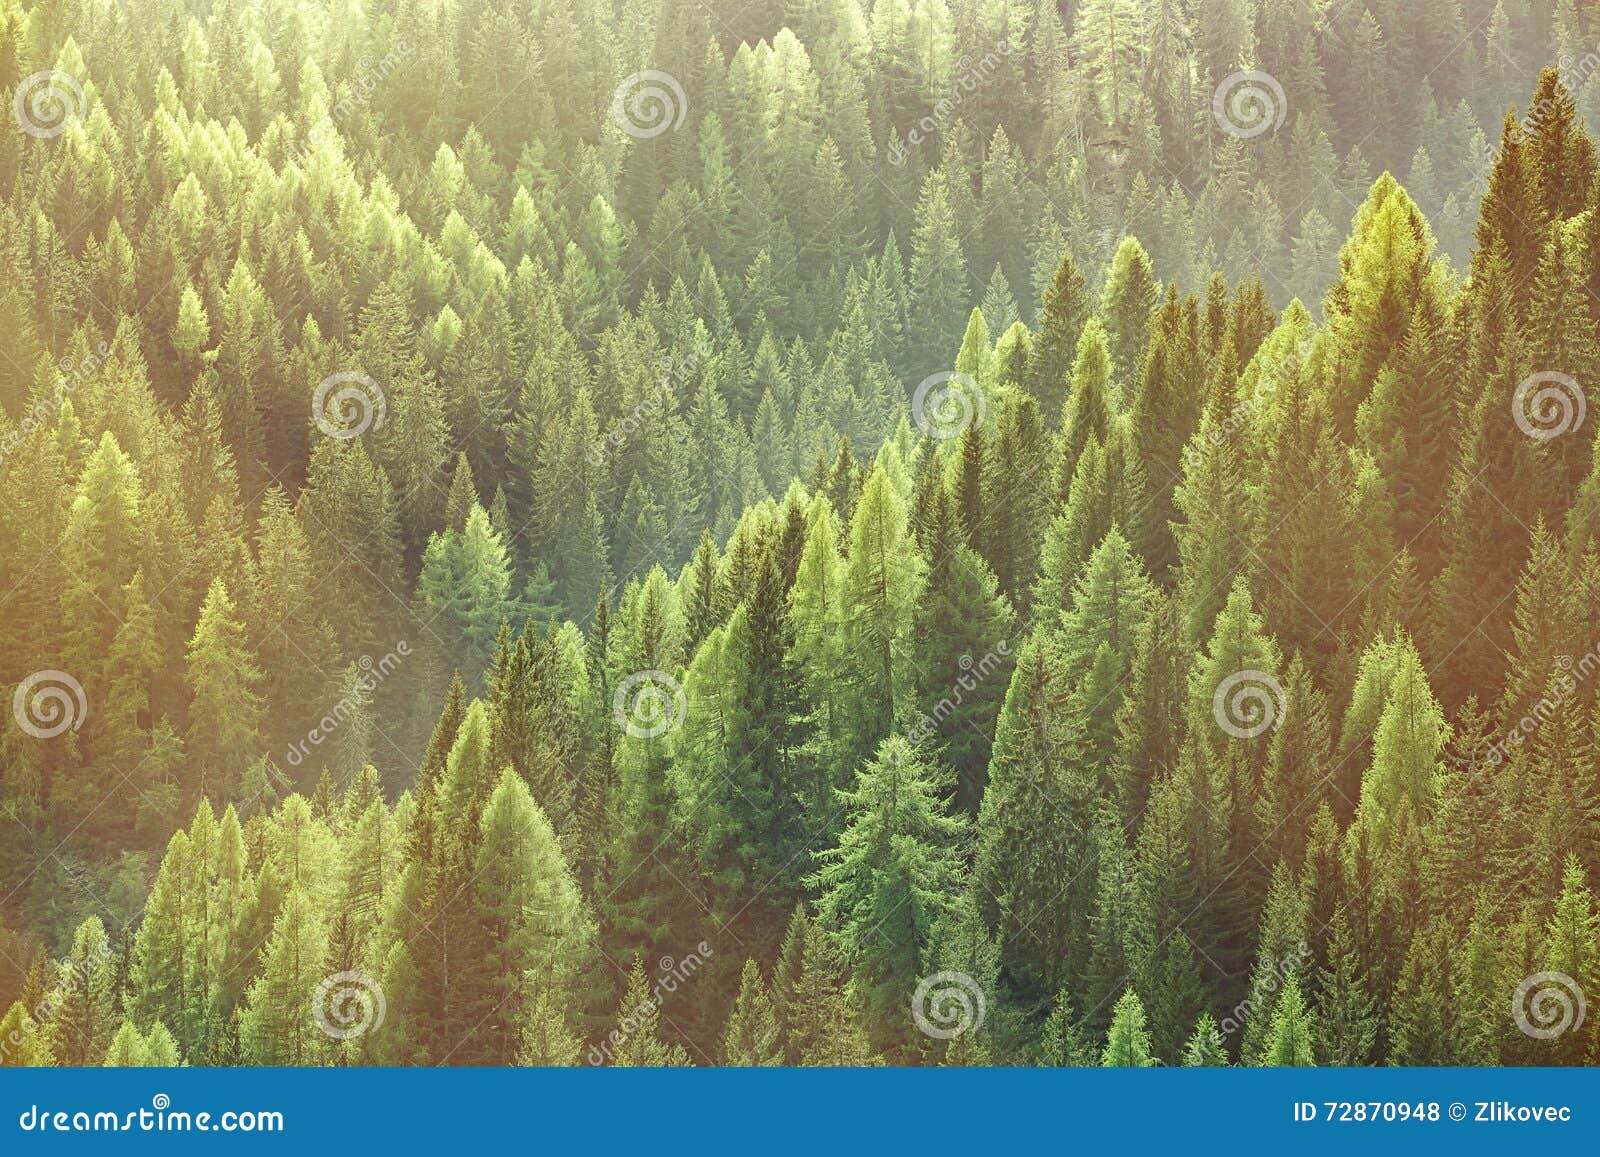 healthy green trees in a forest of old spruce, fir and pine trees